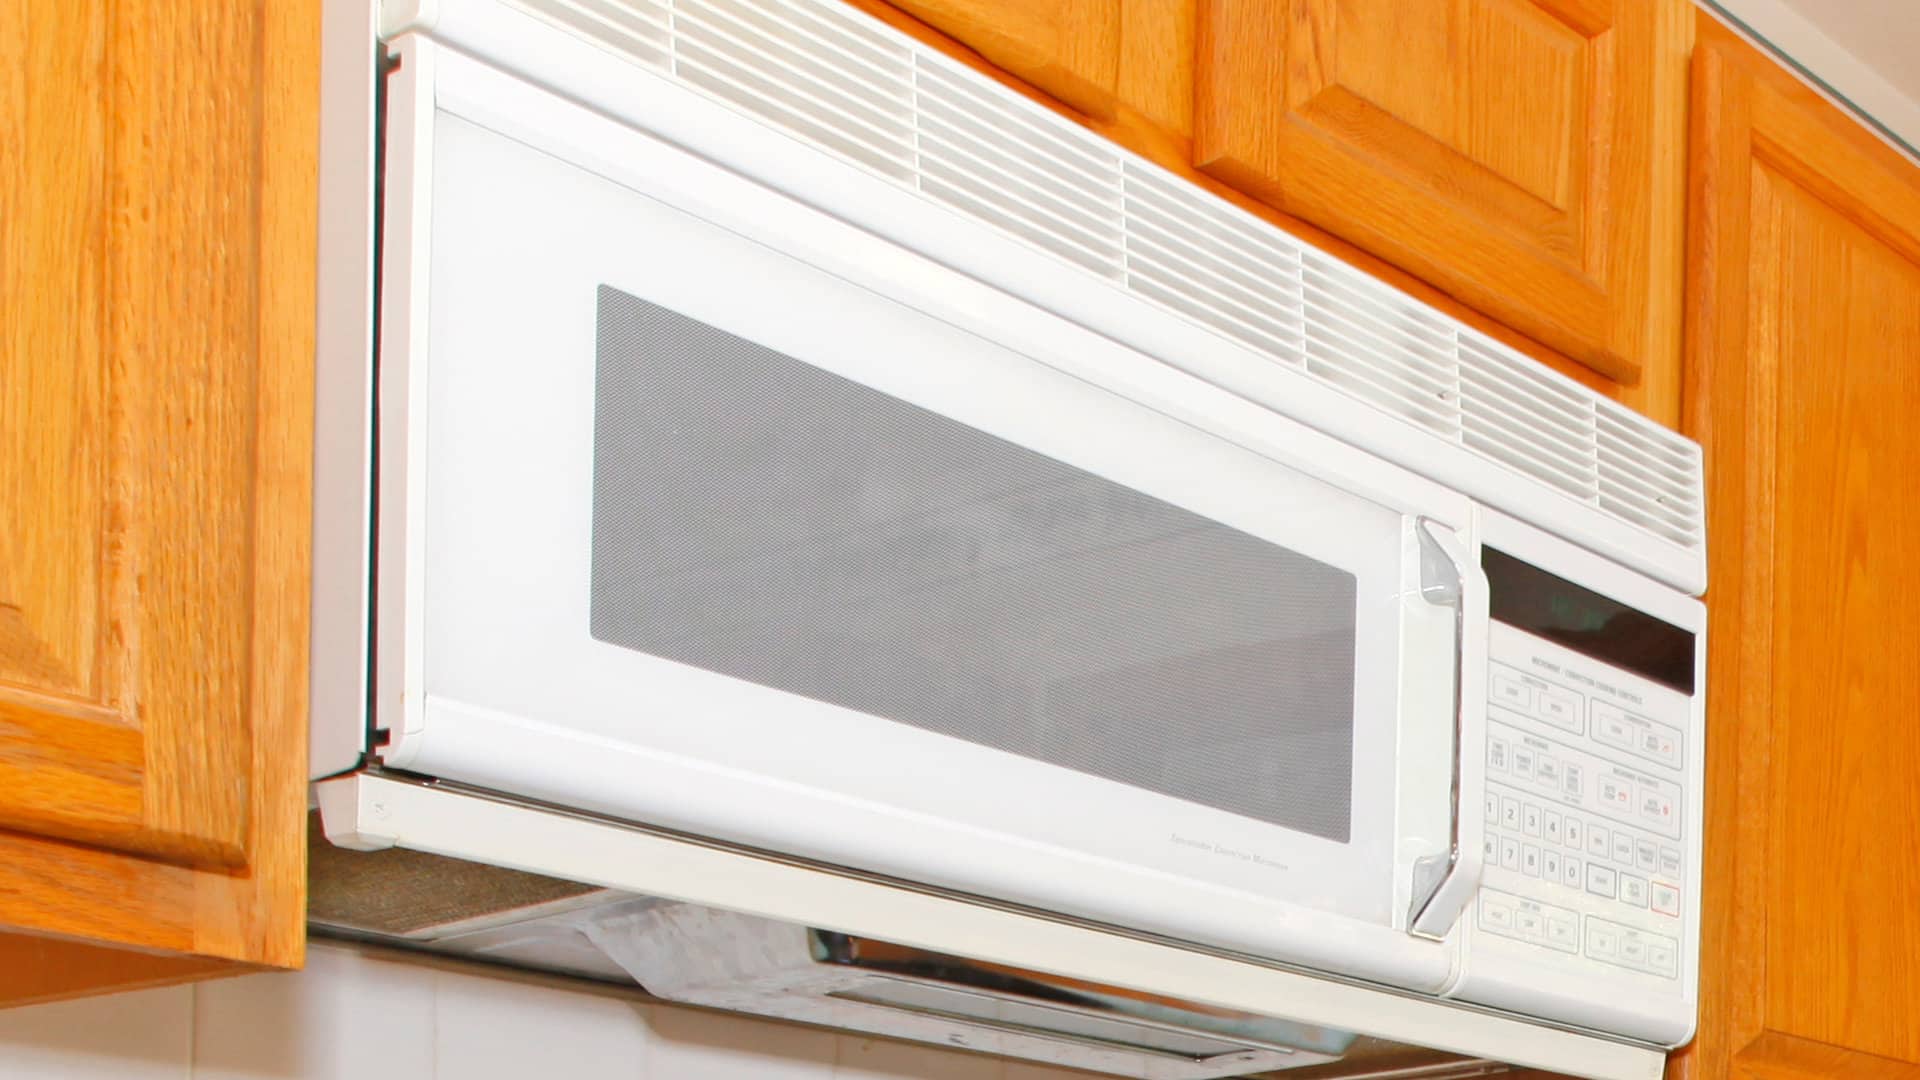 Featured image for “Replacing an Over-the-Range Microwave with a Range Hood”